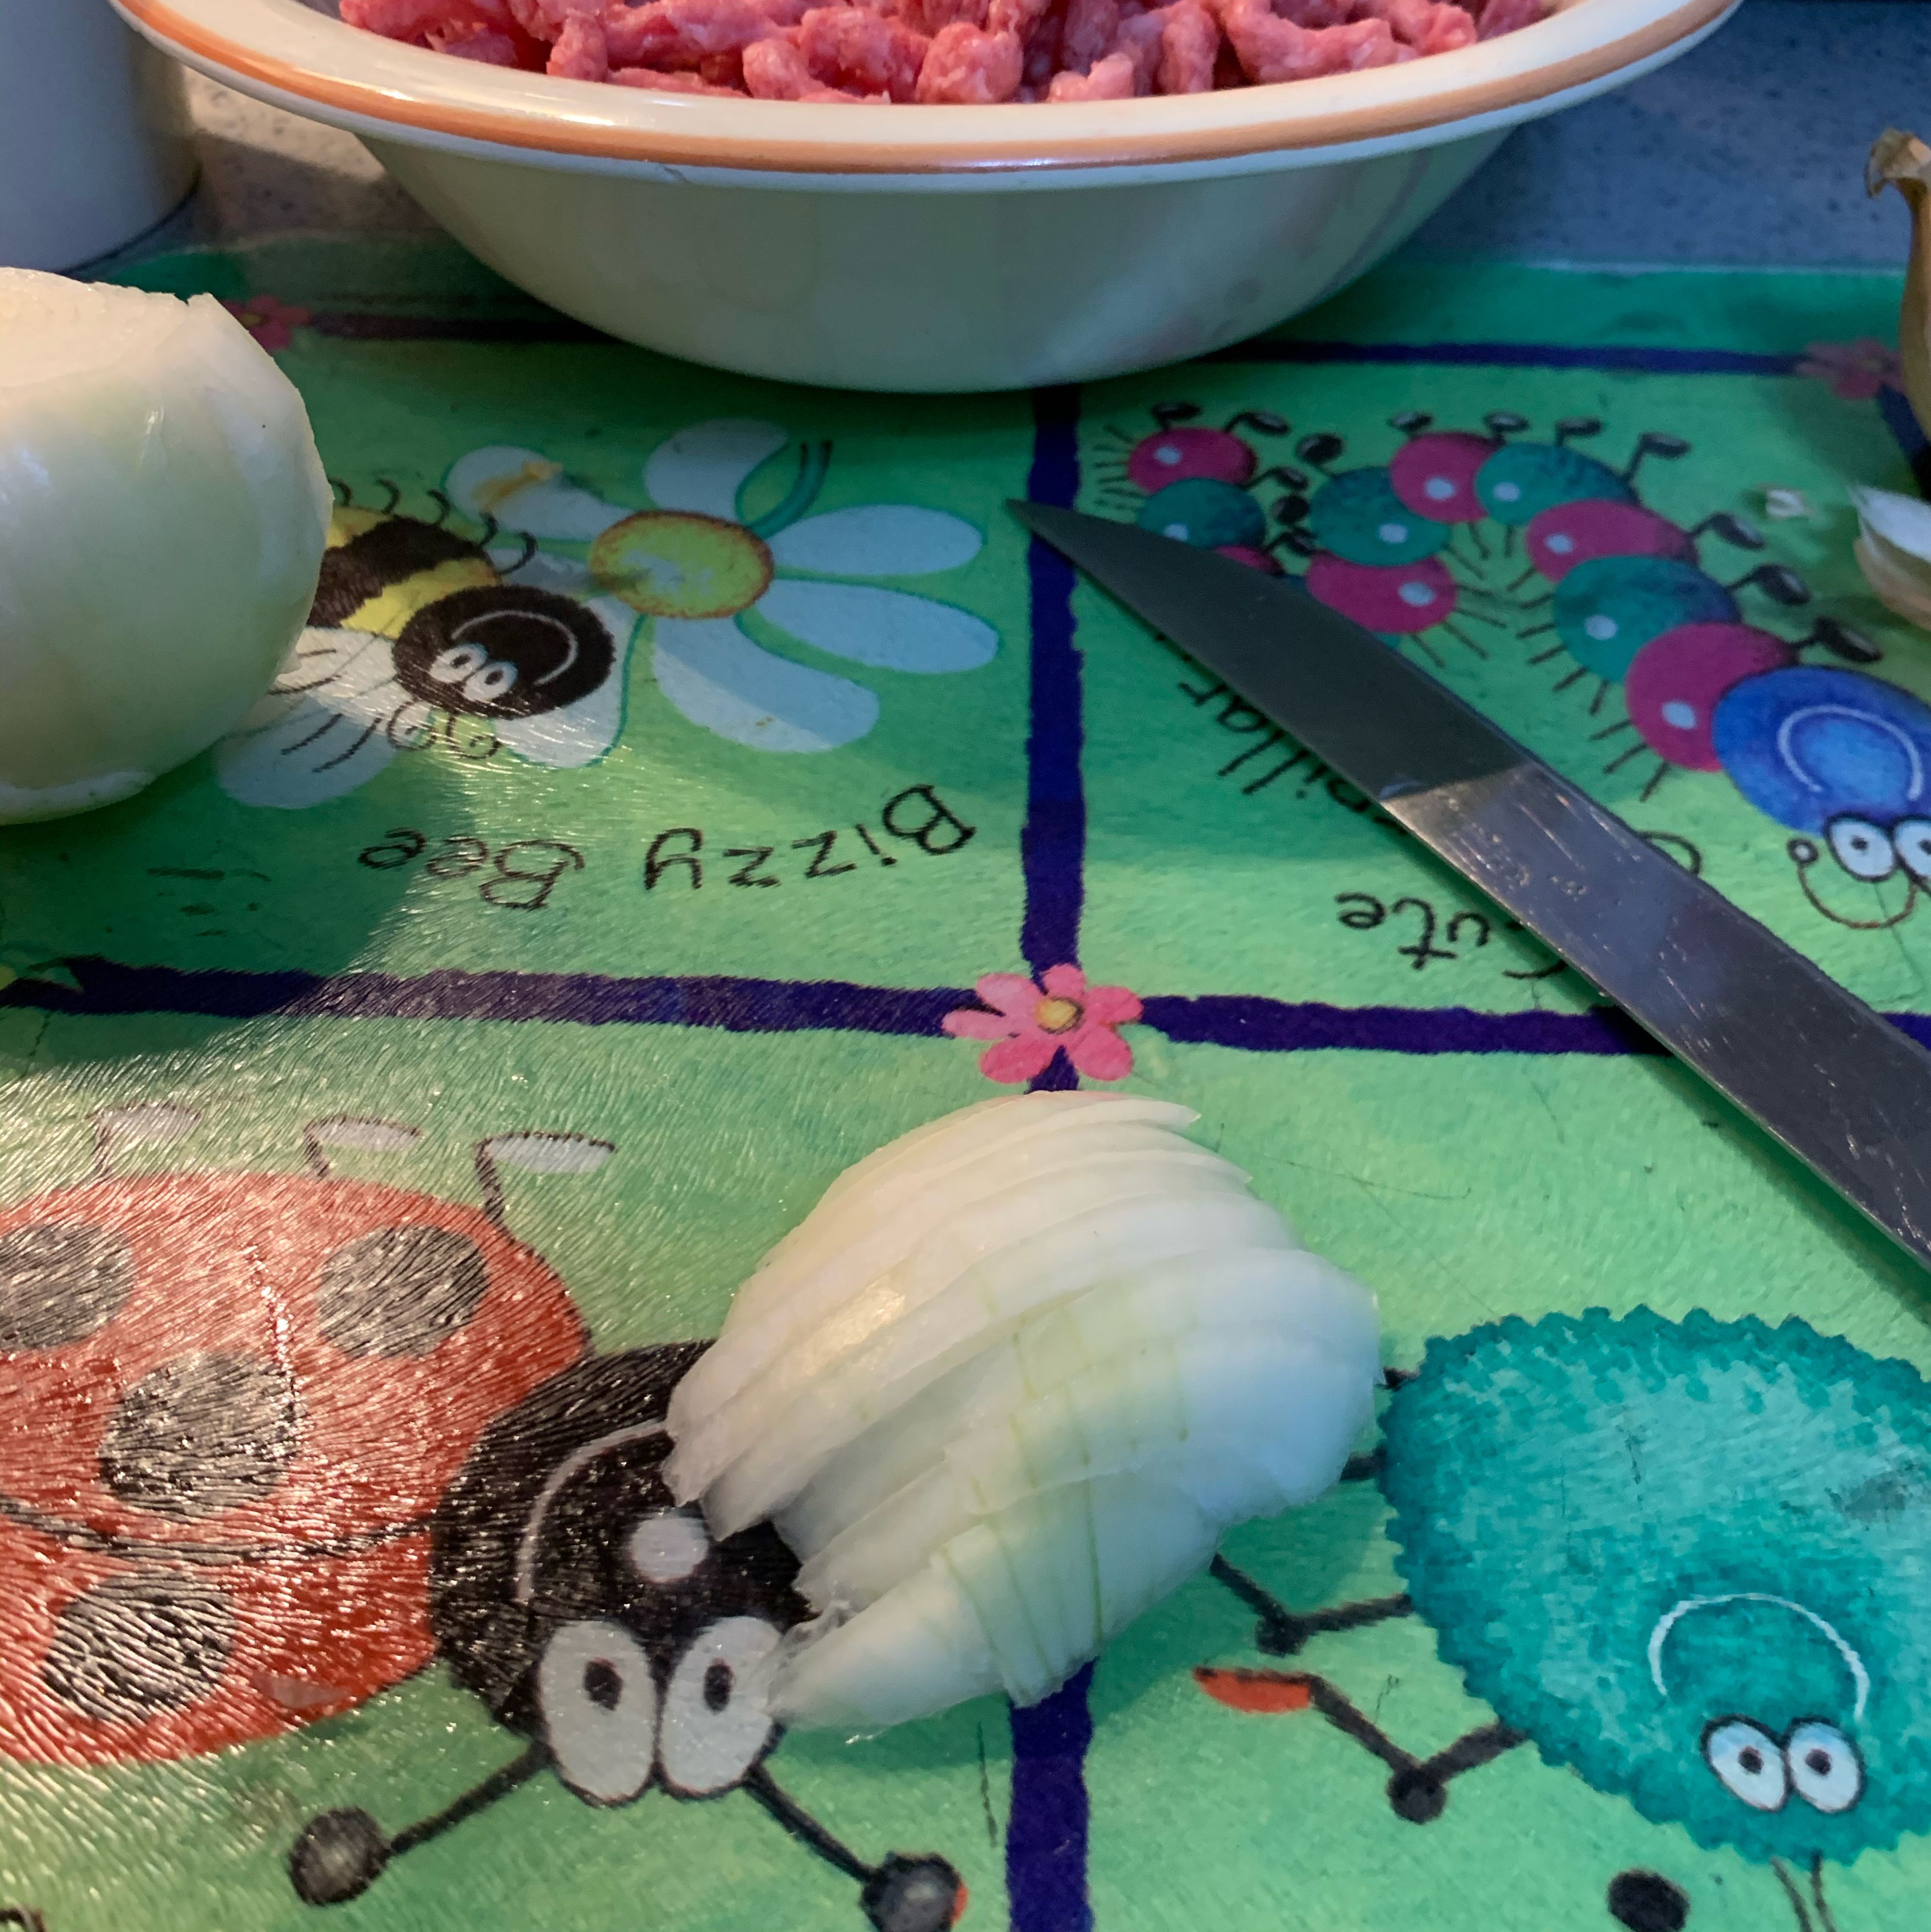 Cut half an onion or a whole (if preferred) in slices like this or cubes.